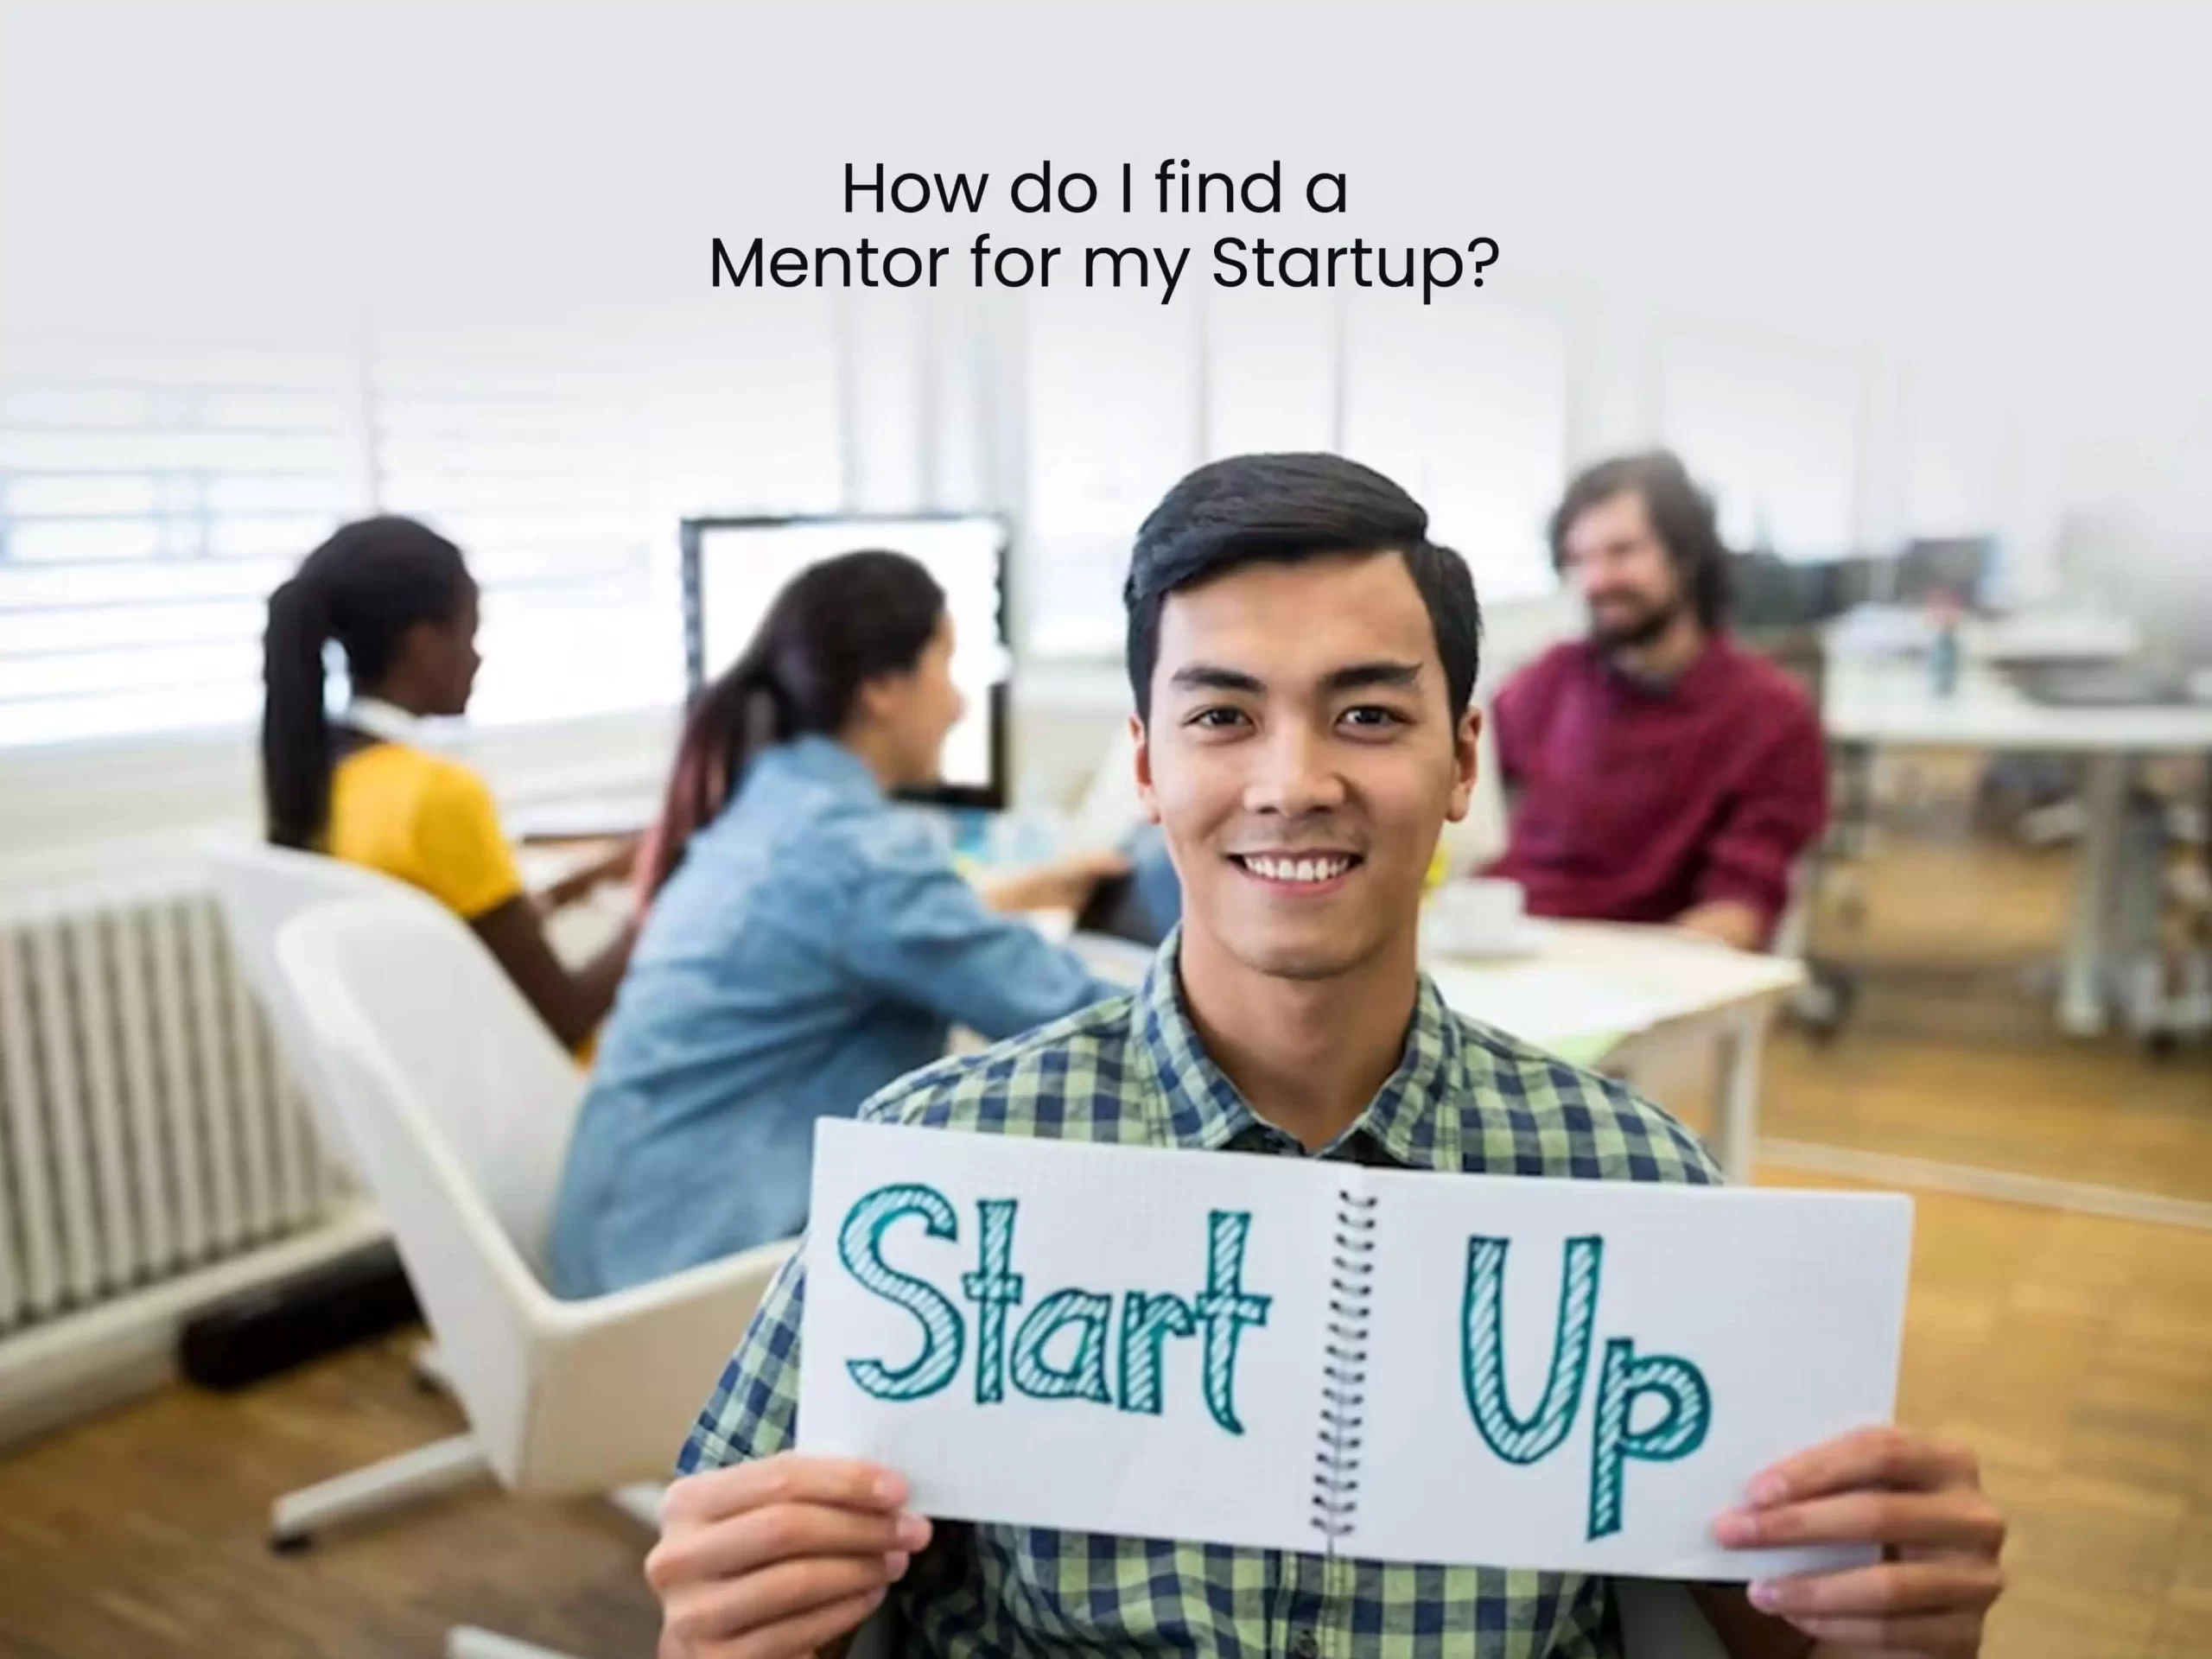 How do I find a mentor for my startup?